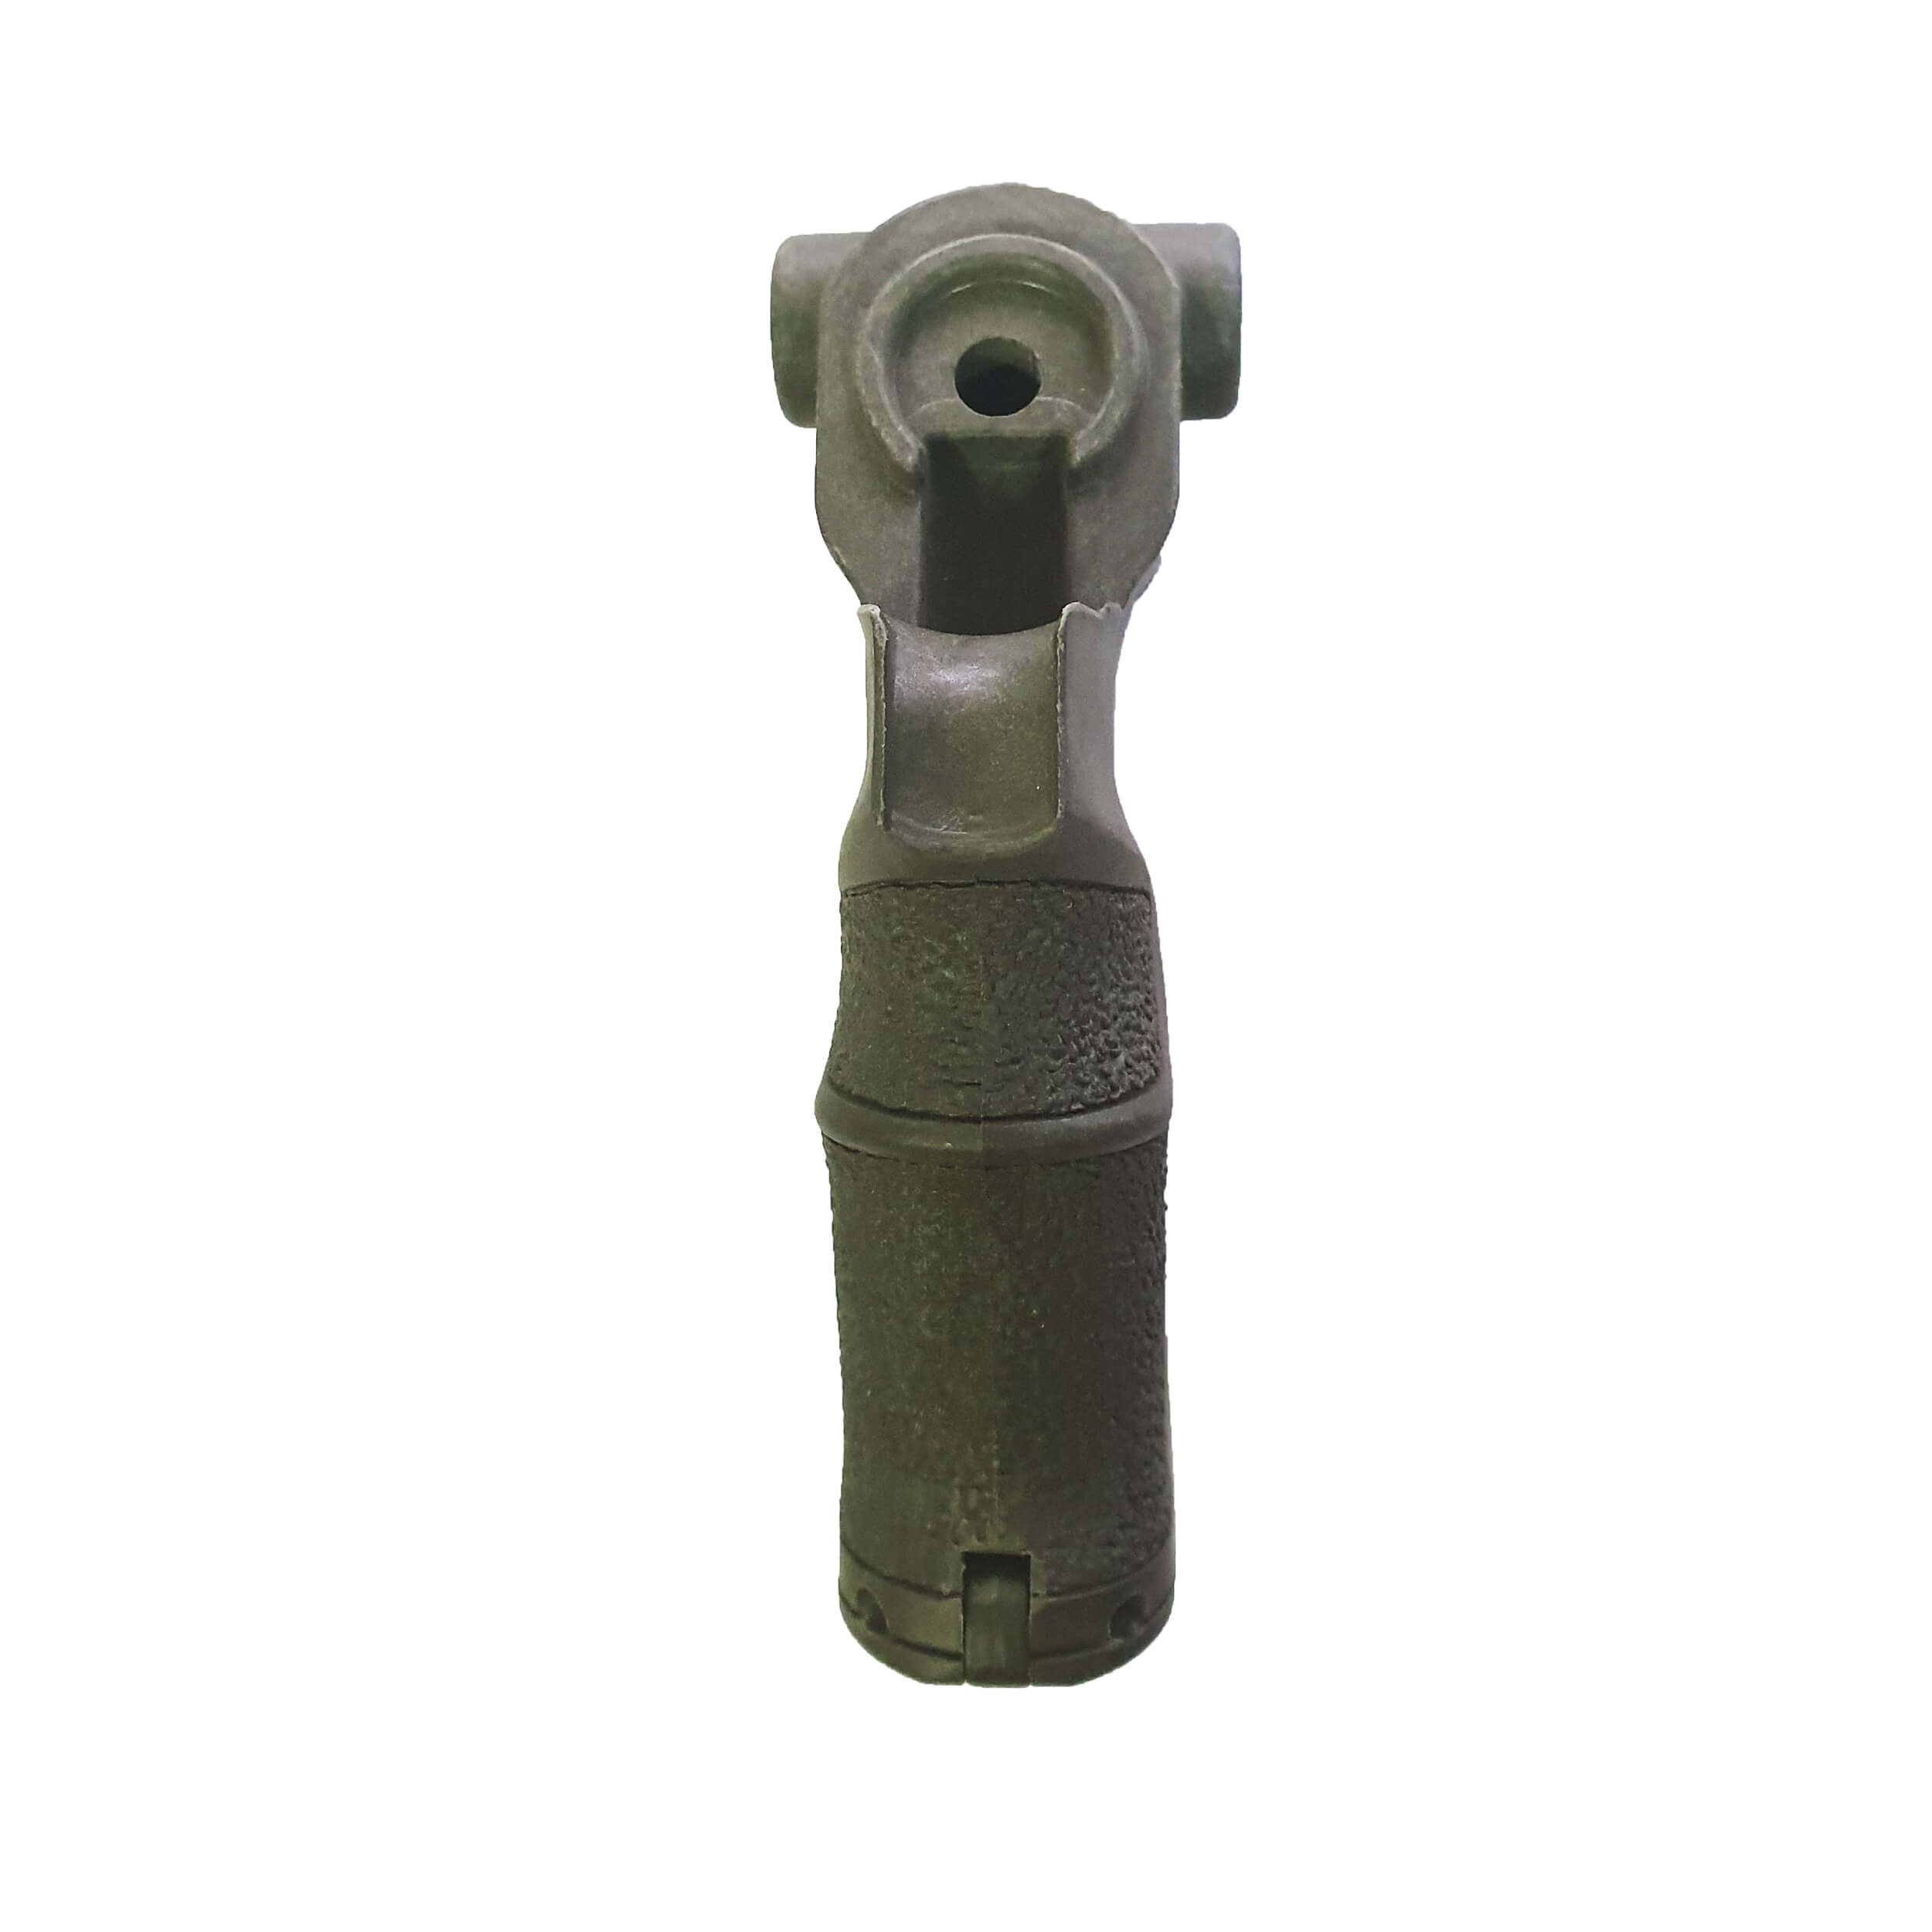 AGM-500 Pistol Grip for Mossberg 500 / 590 with black back cap